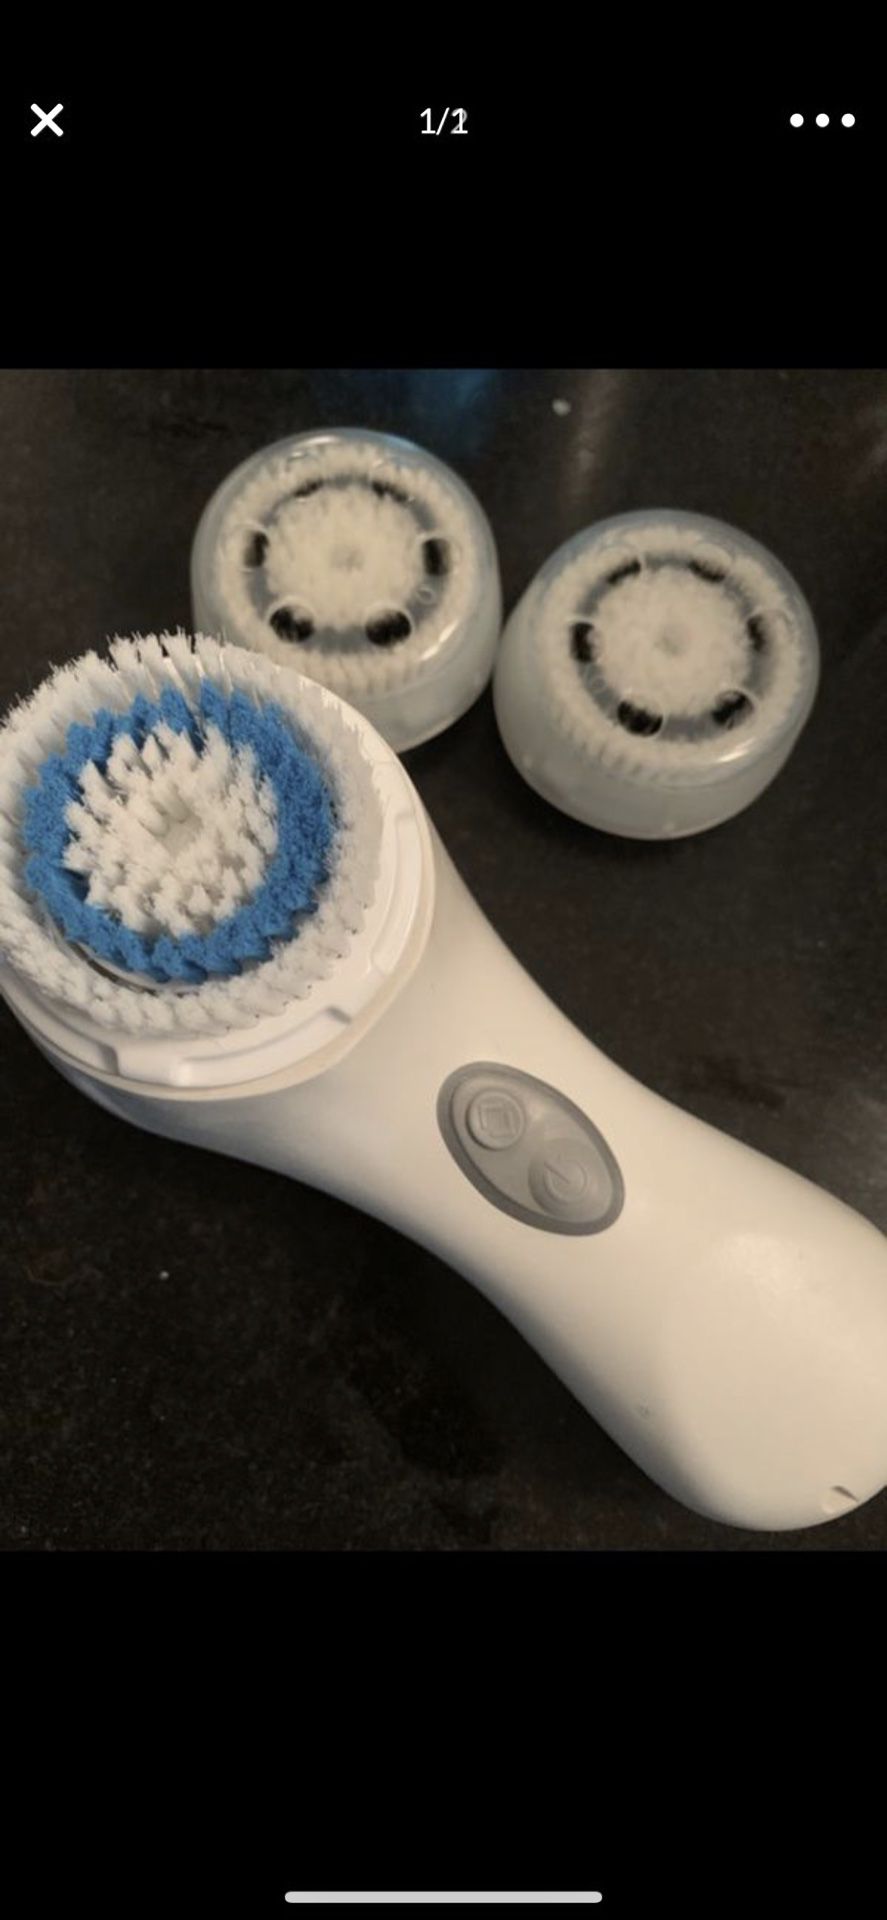 Clarisonic face cleaning brush.